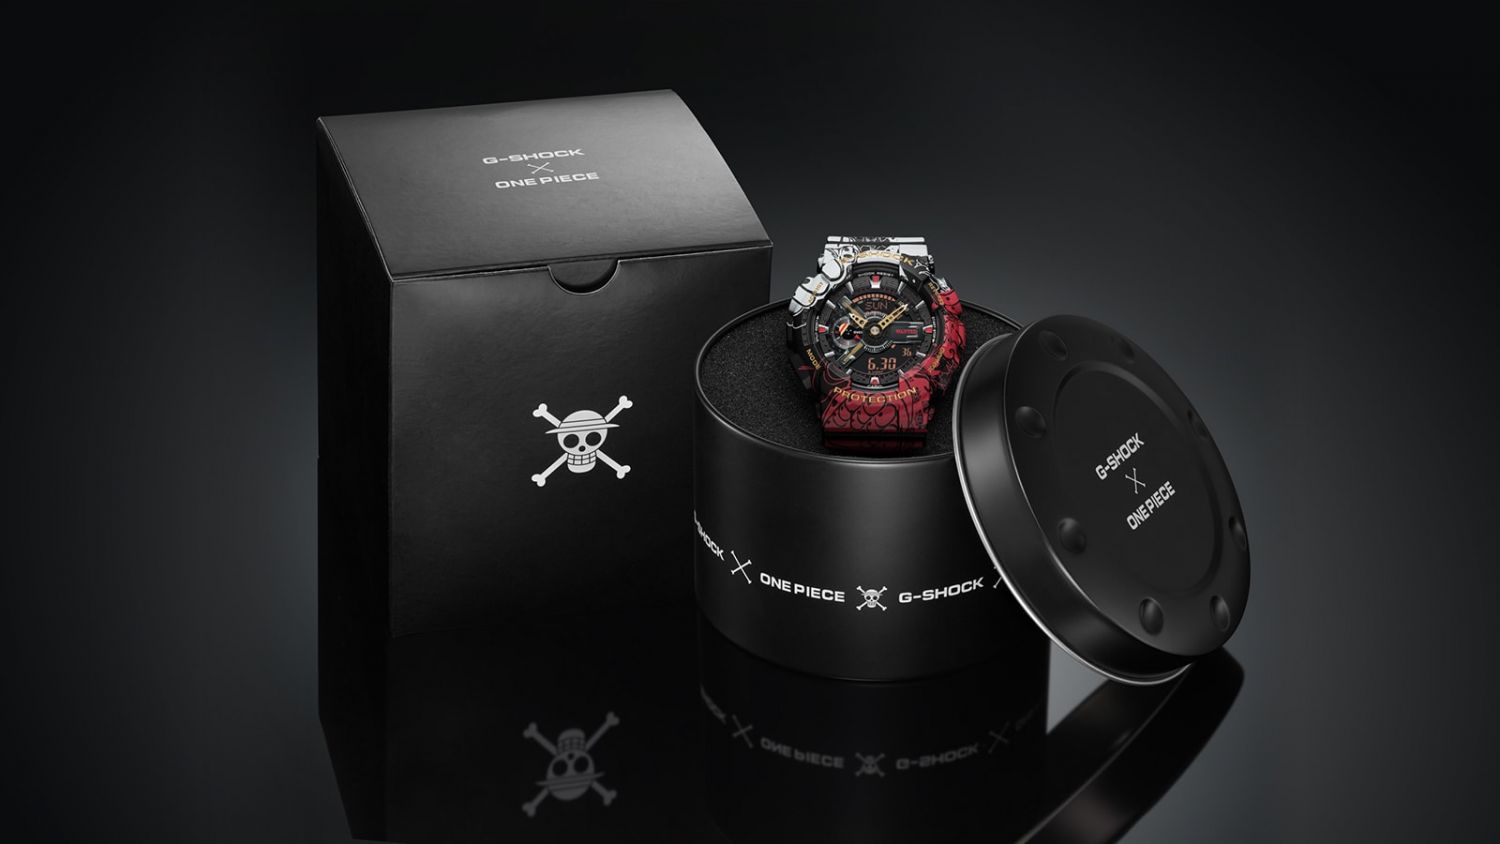 G Shock Unveils One Piece And Dragon Ball Z Watch Collections Geek Culture